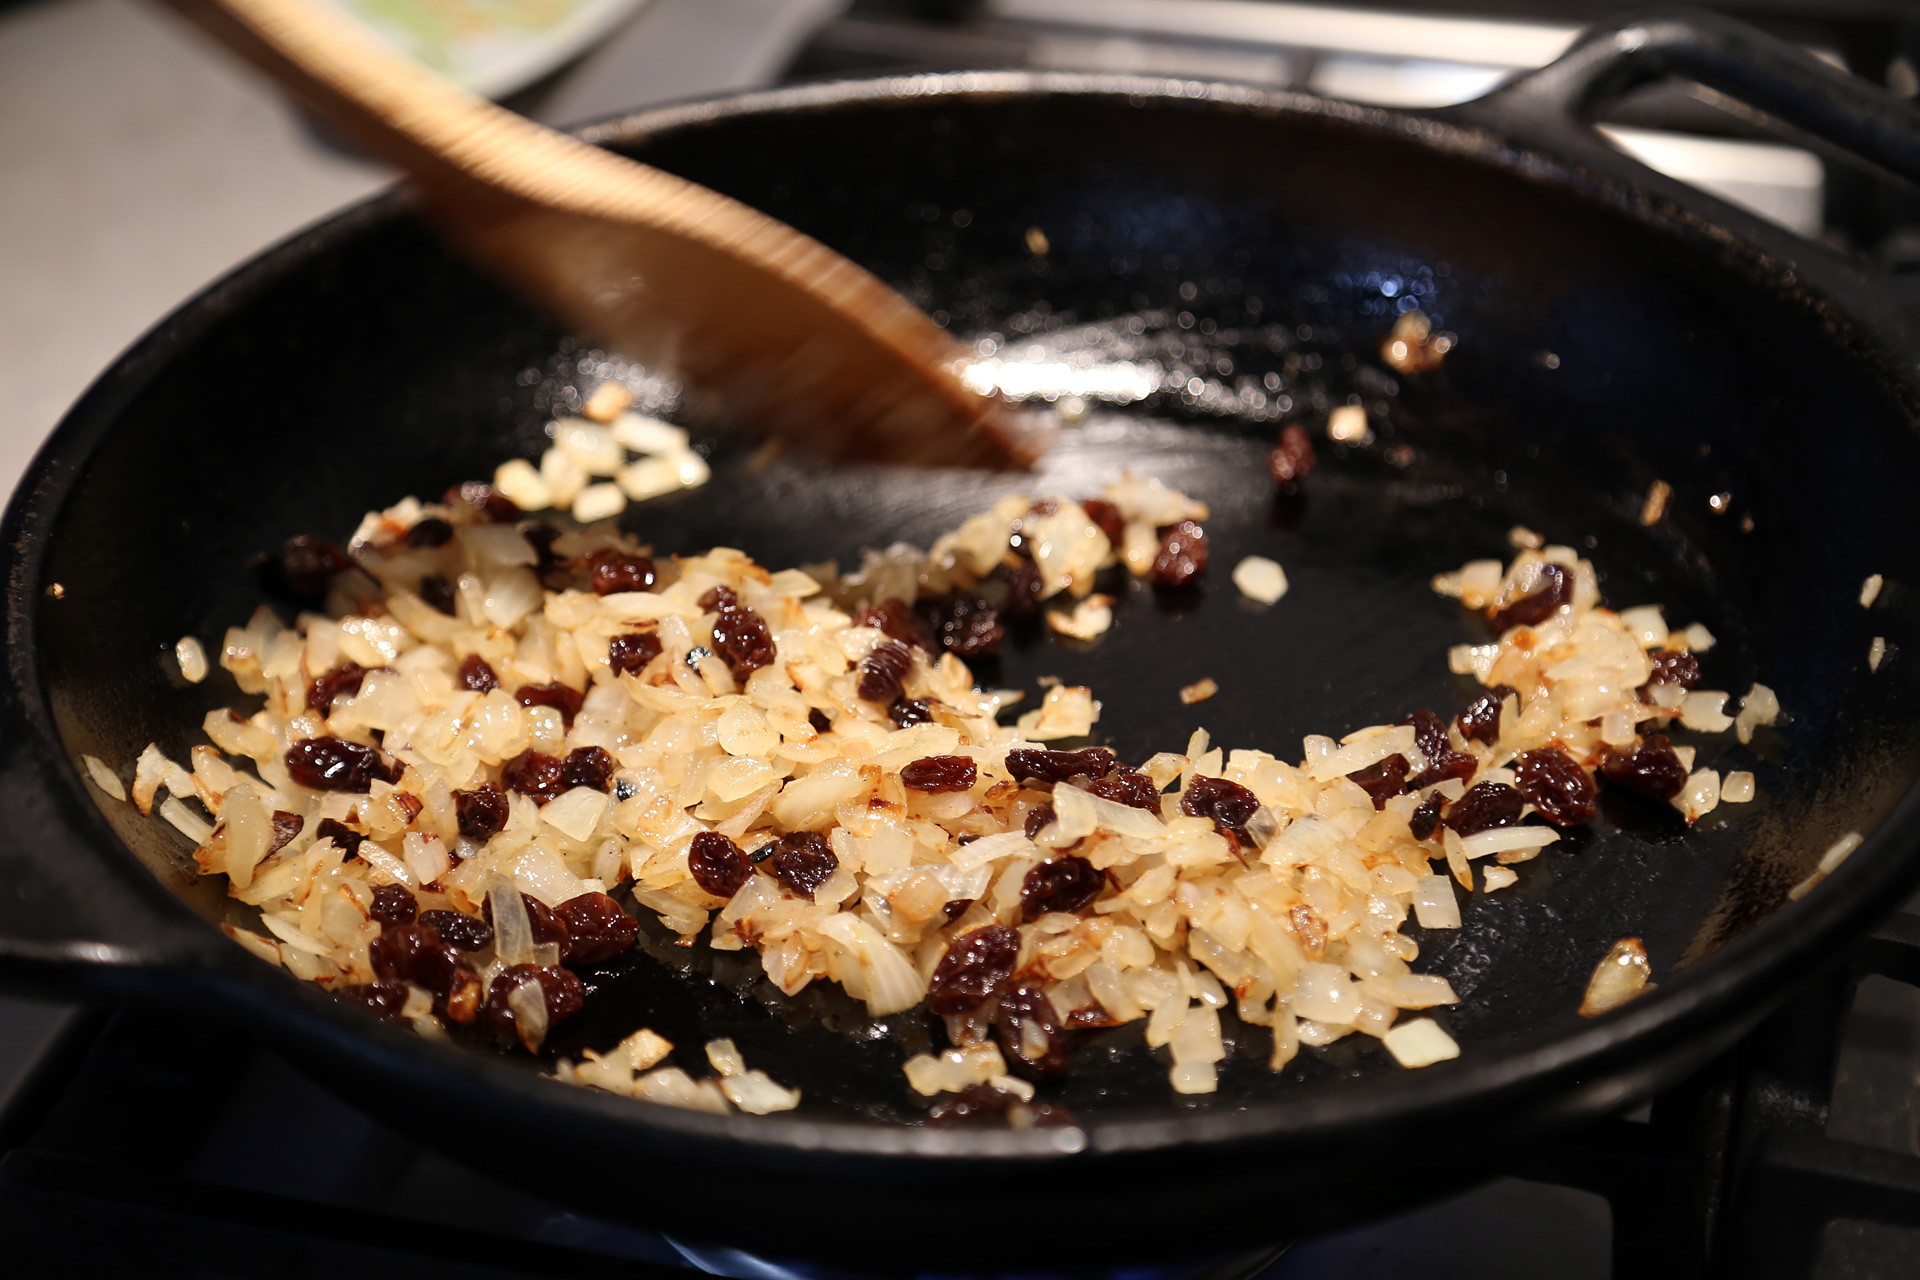 Add the raisins and garlic and fry until the raisins begin to puff and the garlic becomes fragrant, about 2 minutes.